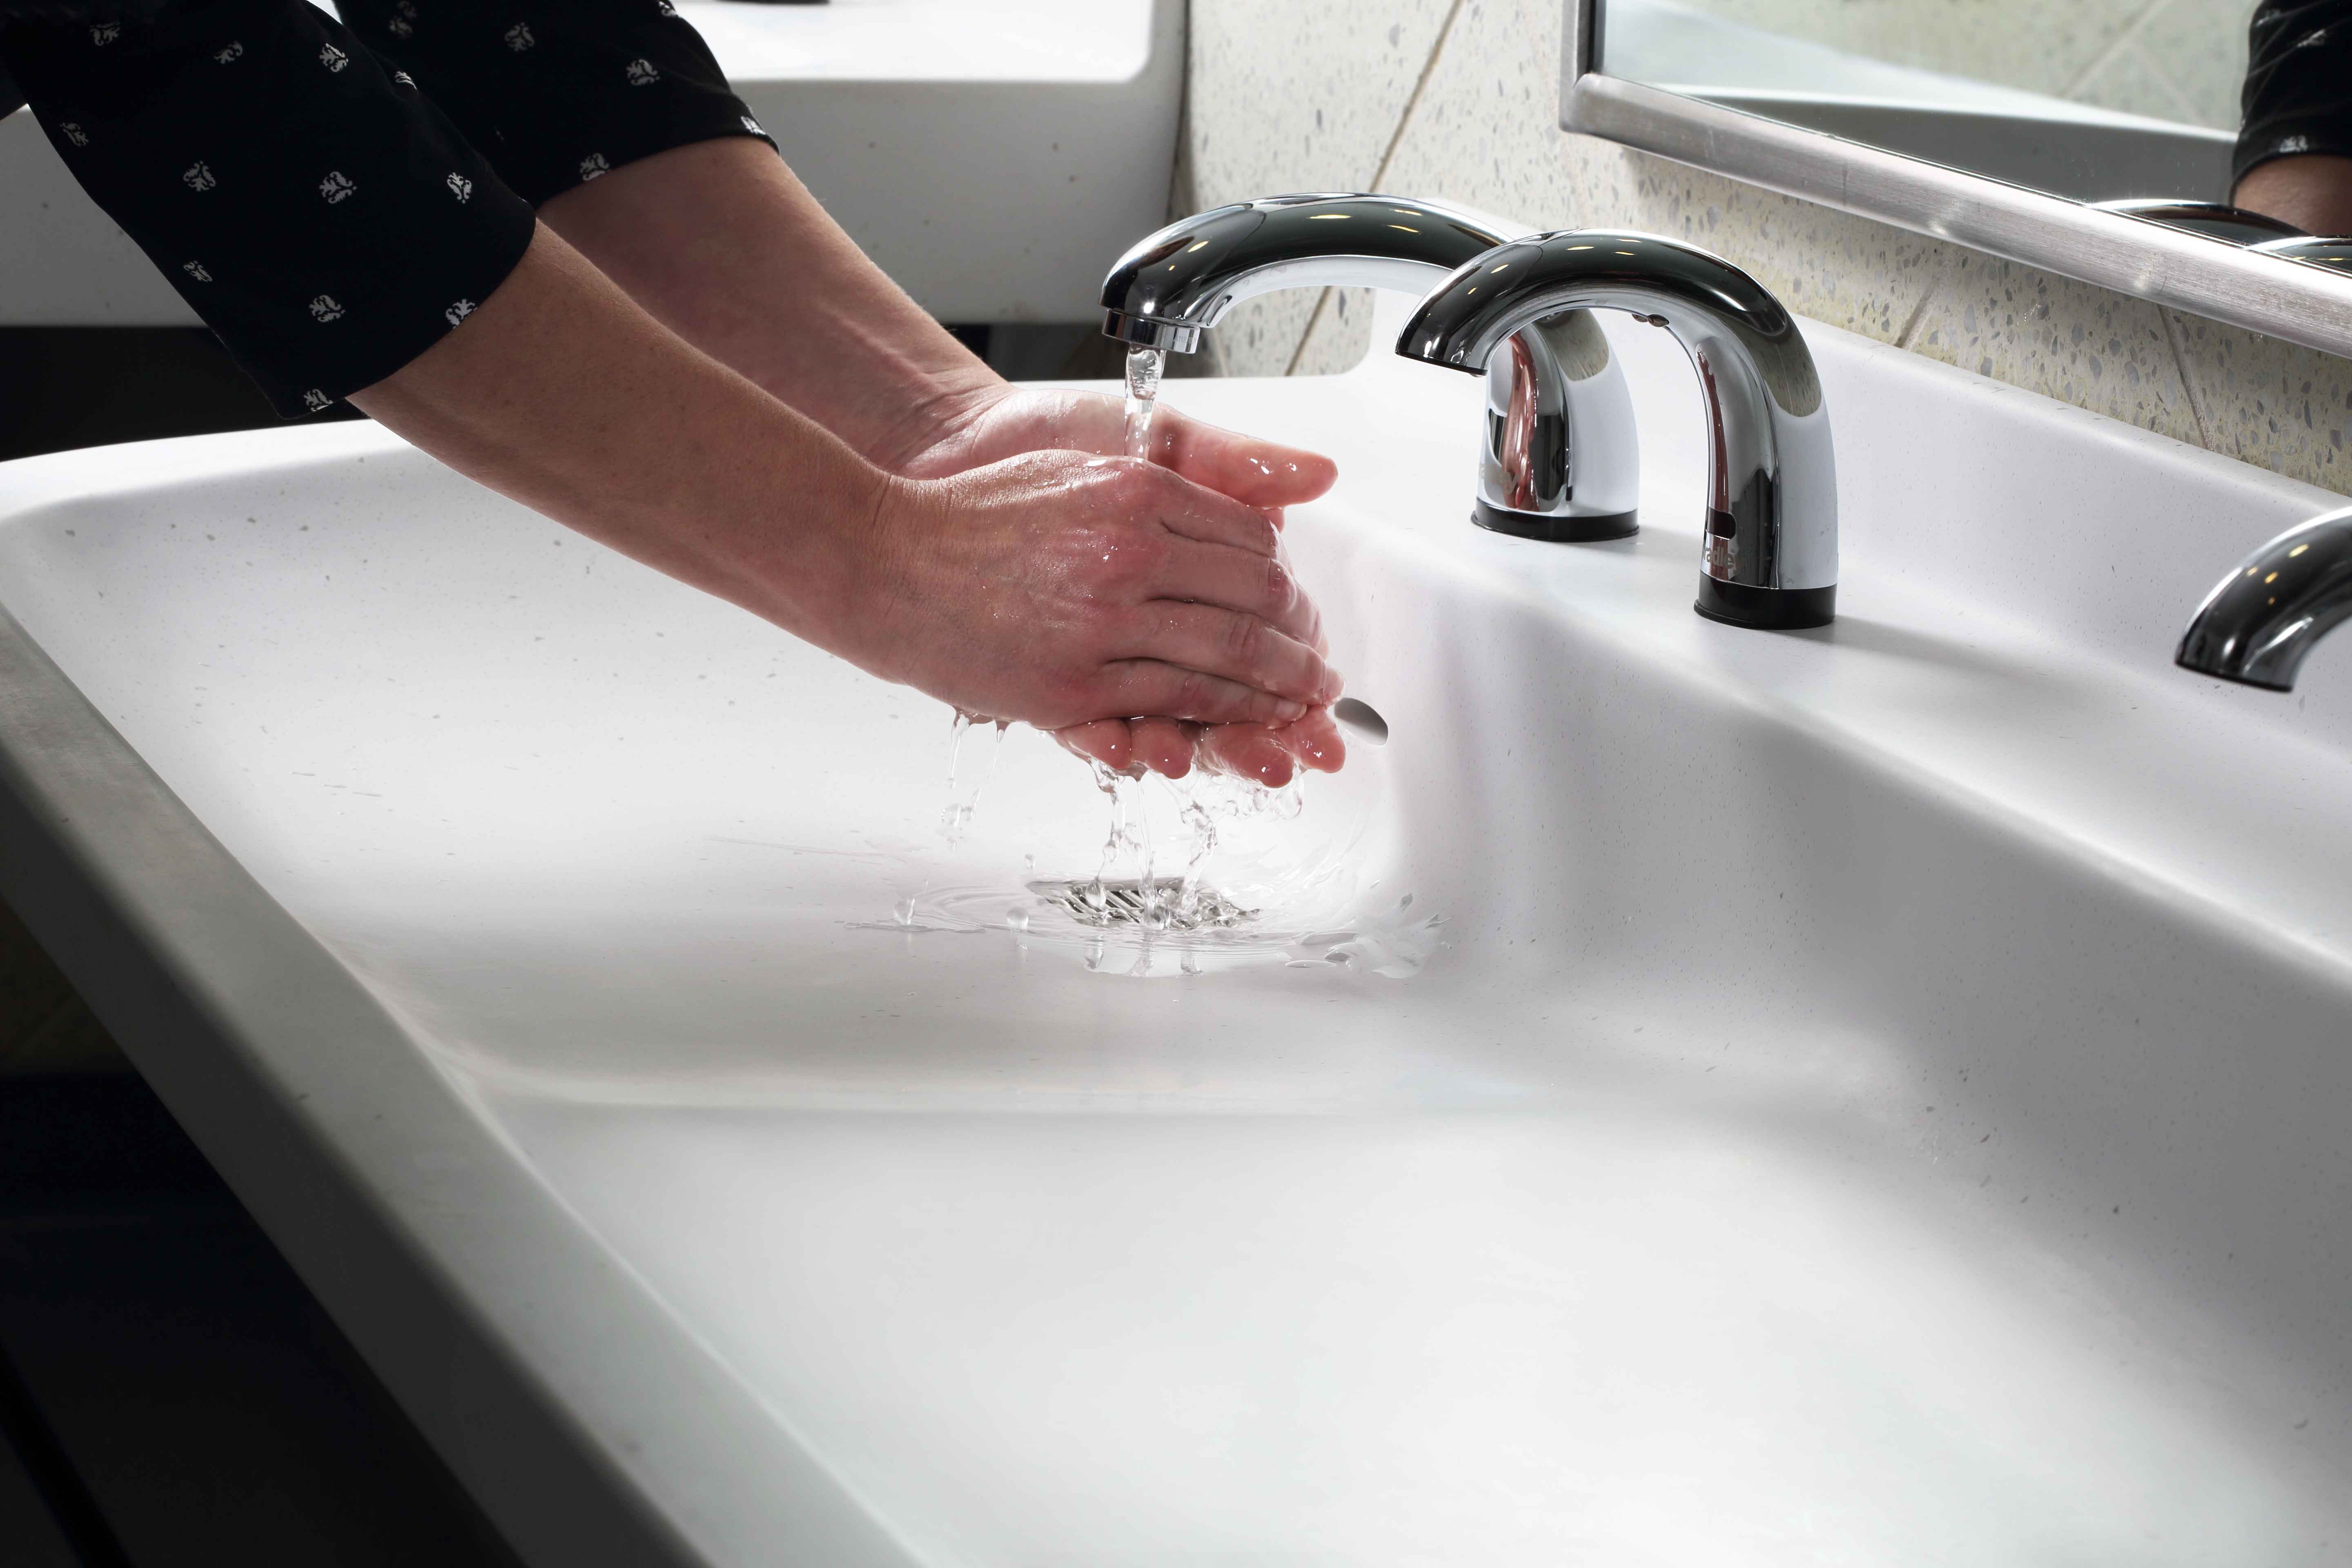 Bradley's Healthy Handwashing Survey found that most Americans believe washing hands is an important step but they don't always take time to wash hands after using the bathroom.